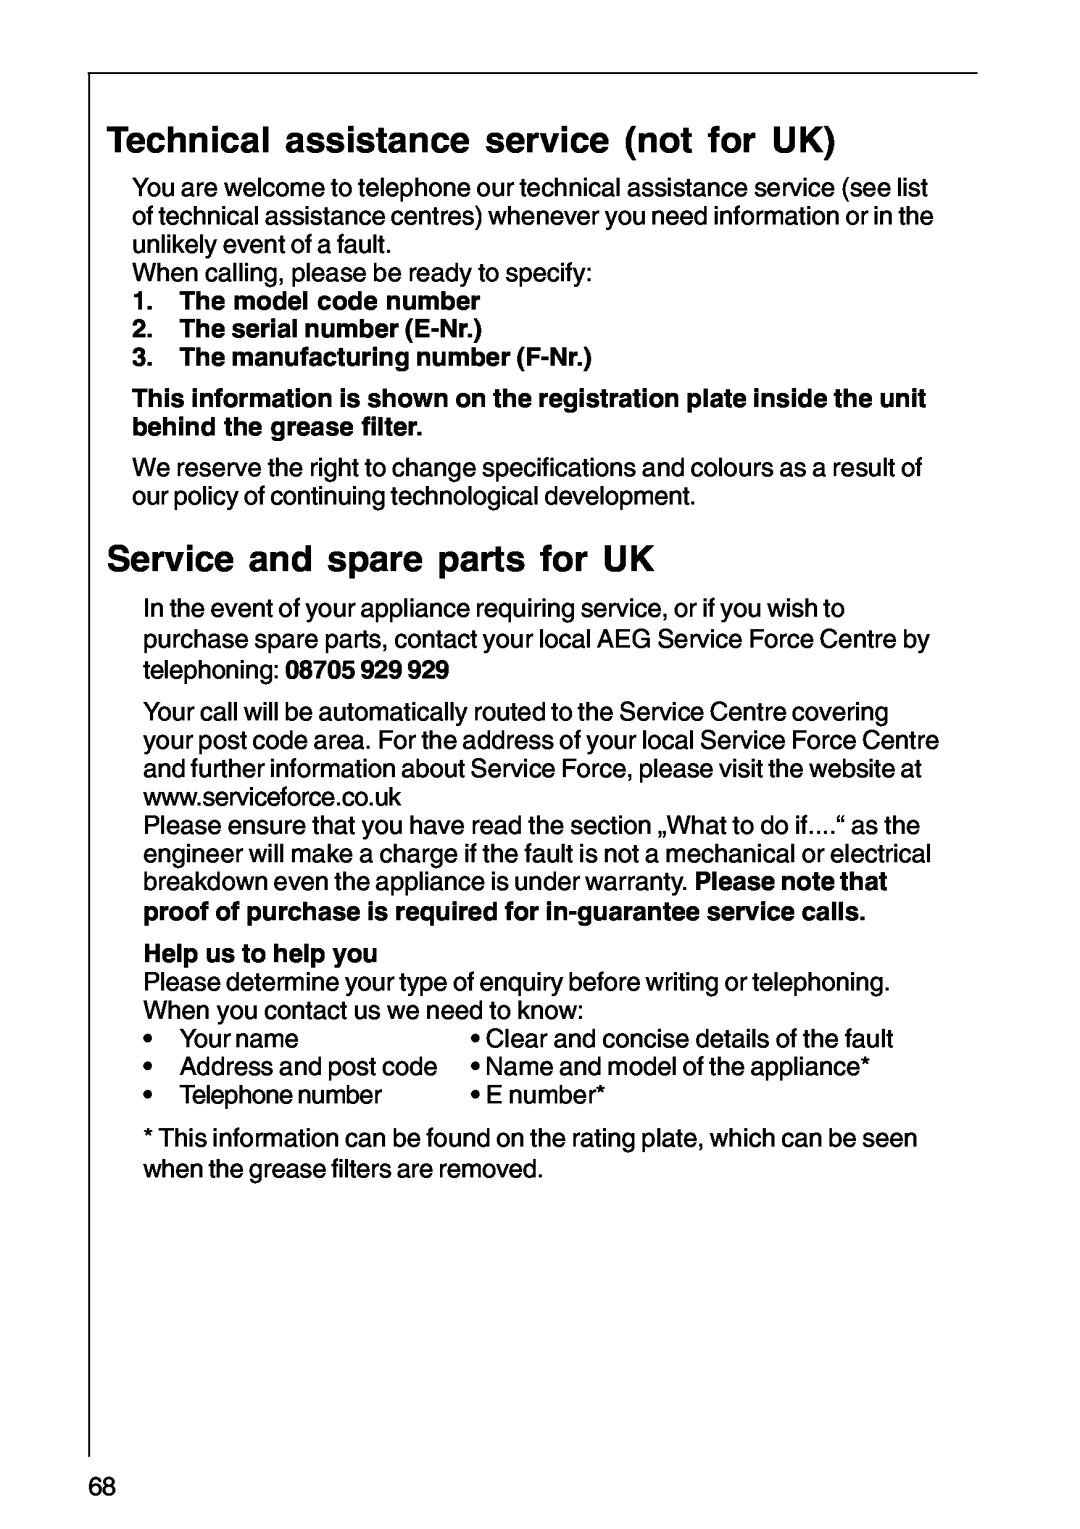 AEG DF 6160 Technical assistance service not for UK, Service and spare parts for UK, The manufacturing number F-Nr 